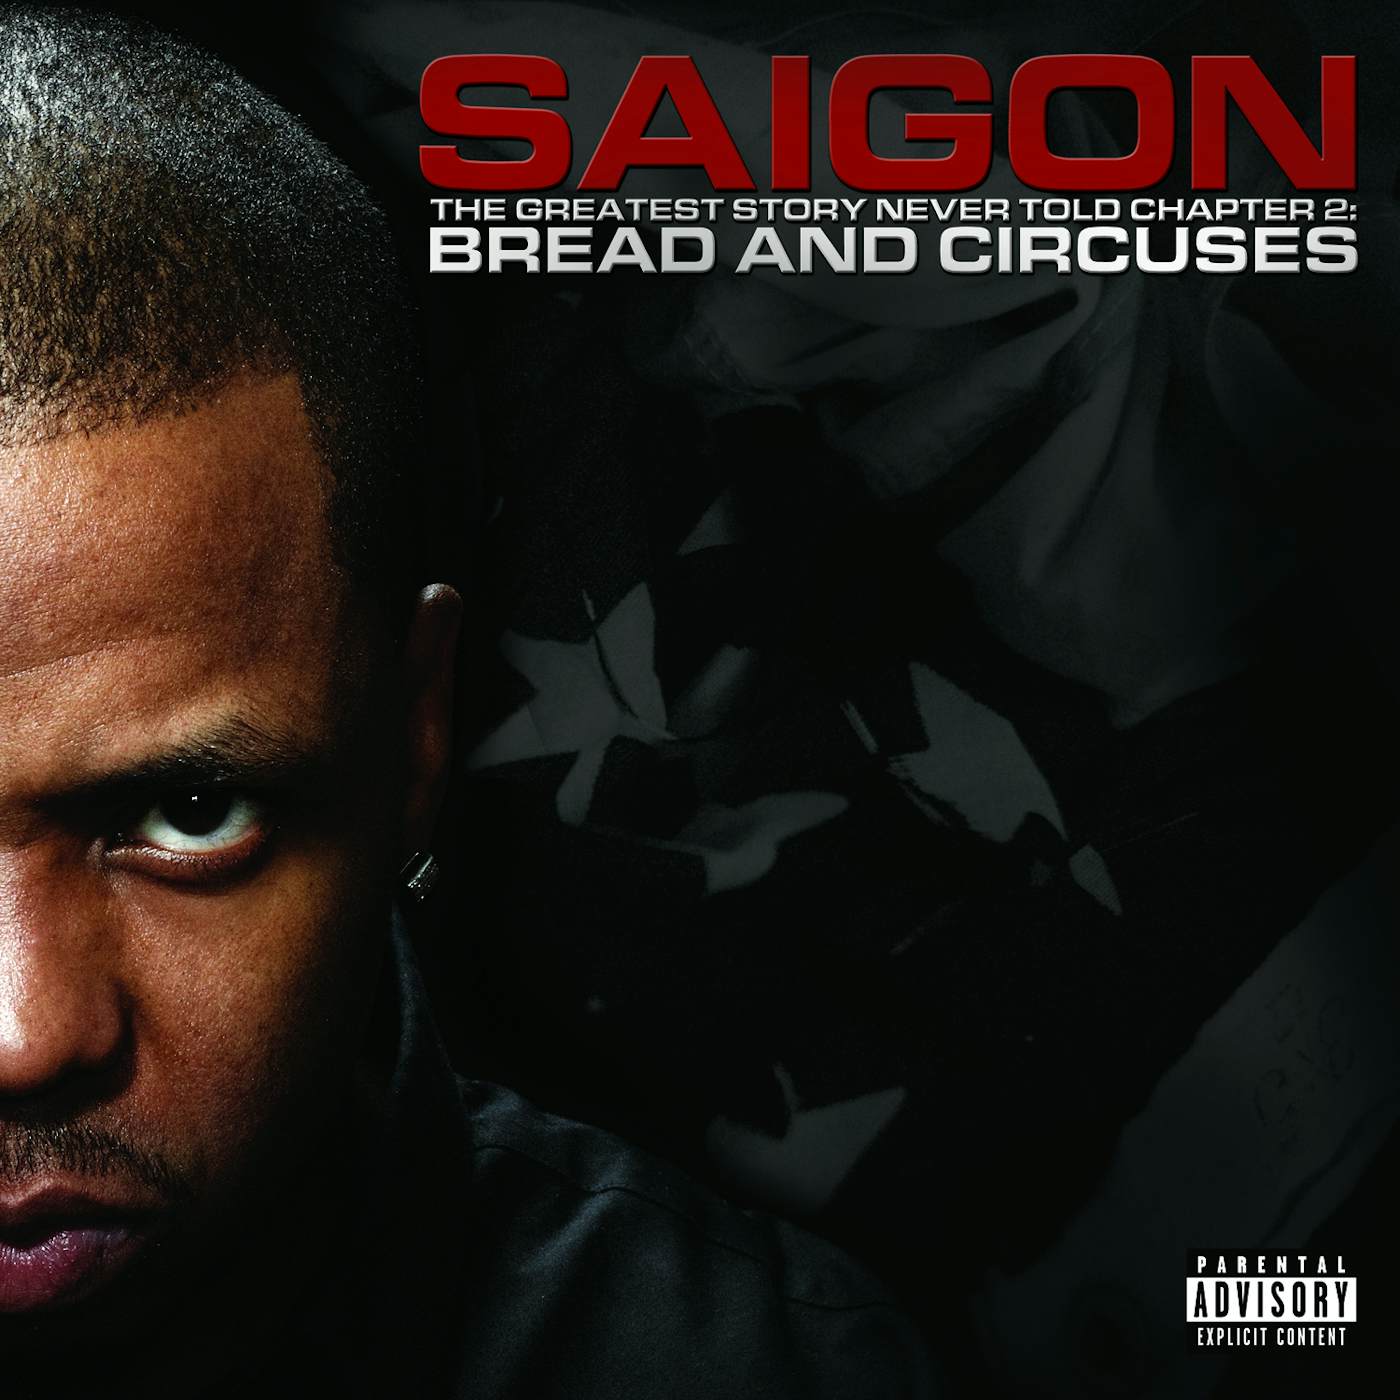 Saigon GREATEST STORY NEVER TOLD CHAPTER 2: BREAD & CD